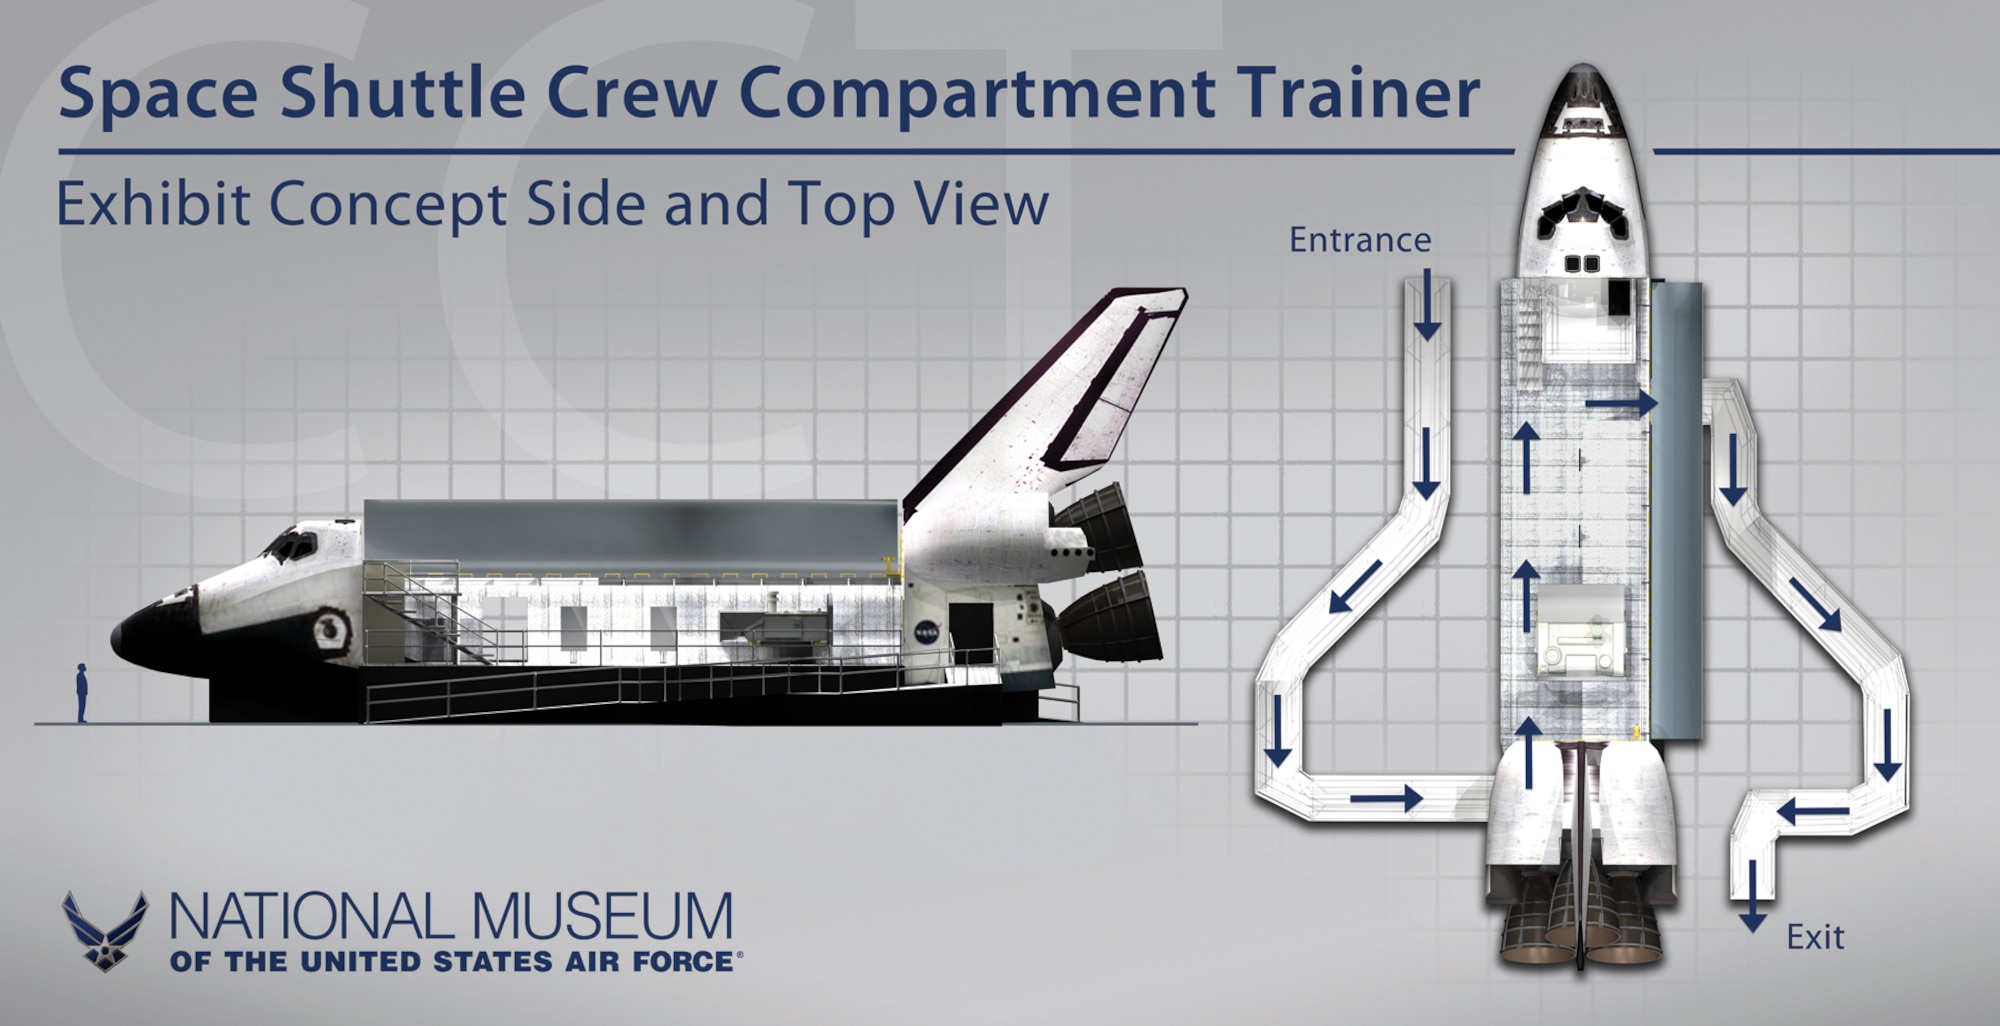 DAYTON, Ohio -- Conceptual drawing of the NASA Space Shuttle Crew Compartment Trainer (CCT) exhibit at the National Museum of the U.S. Air Force. The CCT is a high-fidelity representation of the Space Shuttle Orbiter crew station that was used primarily for on-orbit crew training and engineering evaluations. (September 2012 udpate)